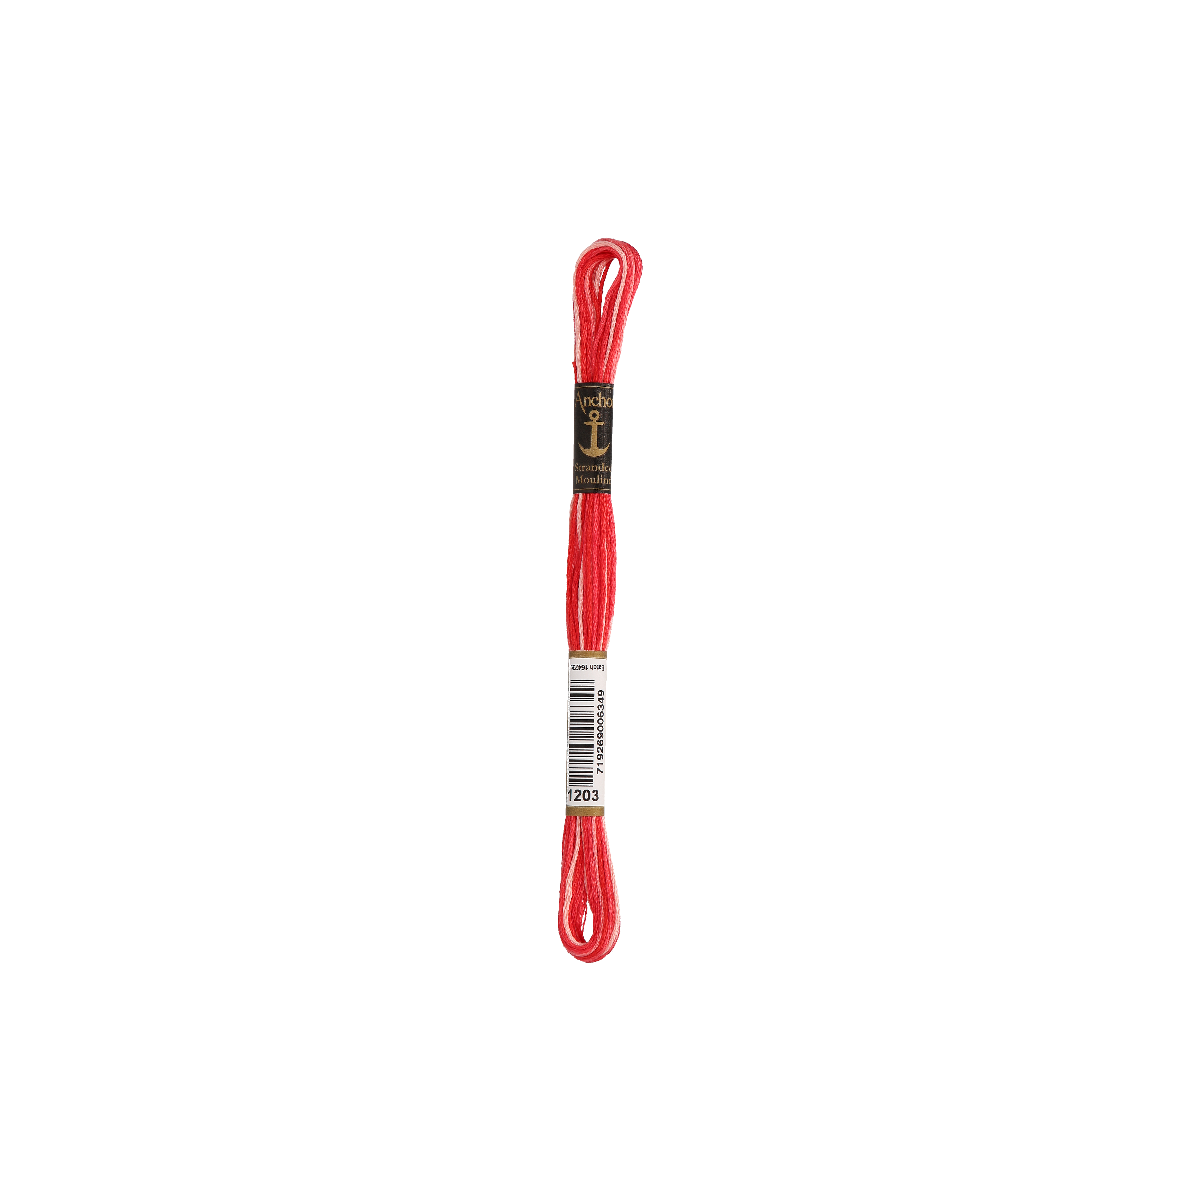 Anchor Sticktwist 8m, rot ombre, Baumwolle, Farbe 1203,...